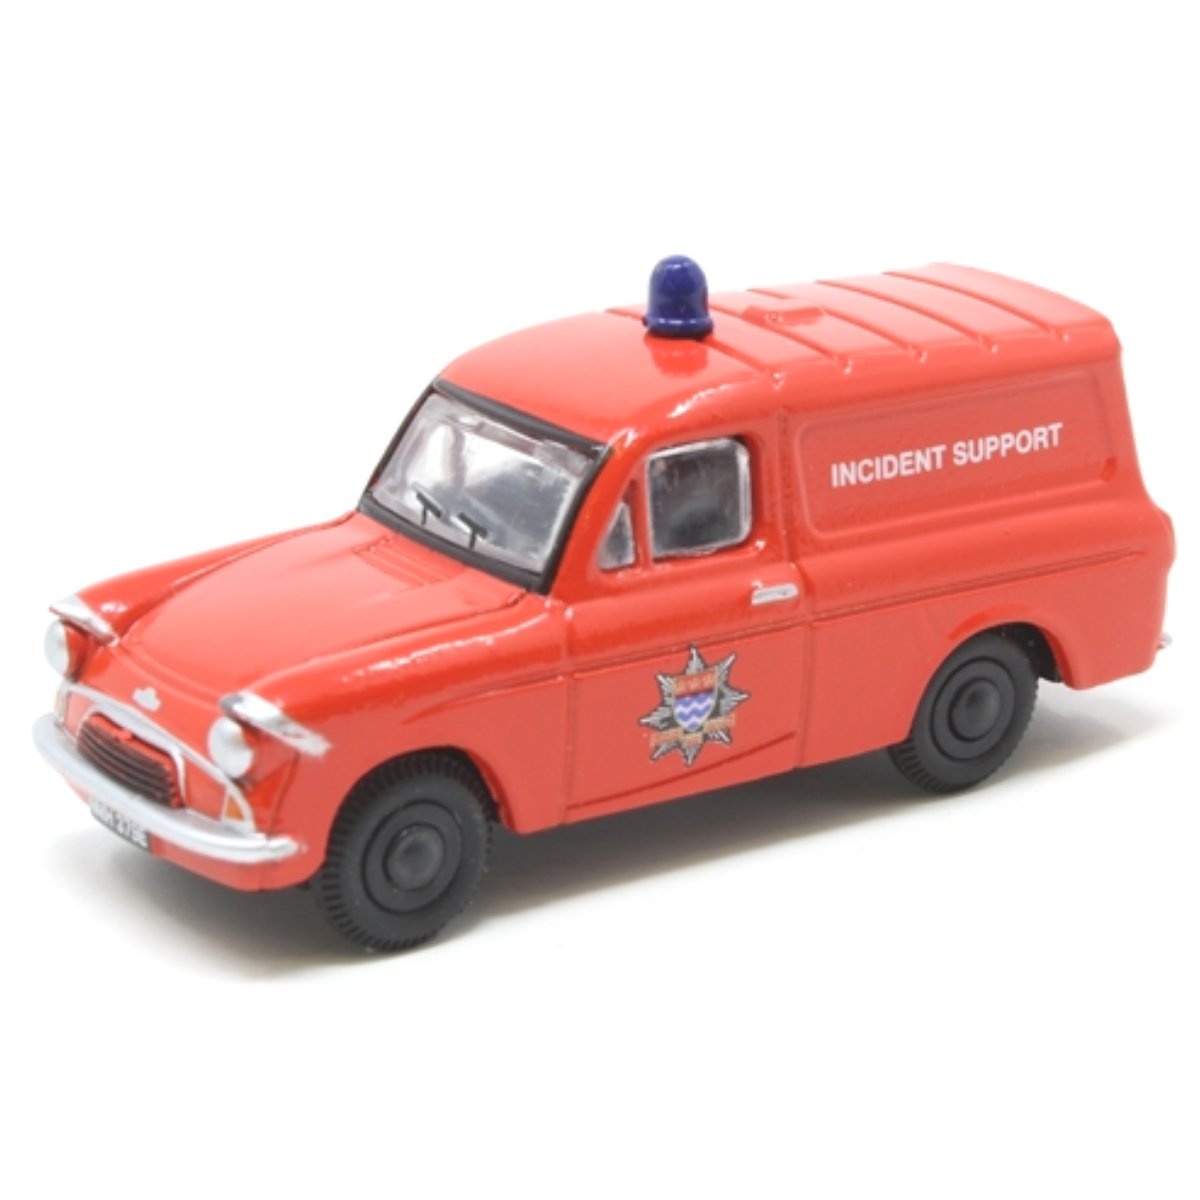 Oxford Diecast 76ANG022 Ford Anglia - Fire Incident Support - Phillips Hobbies